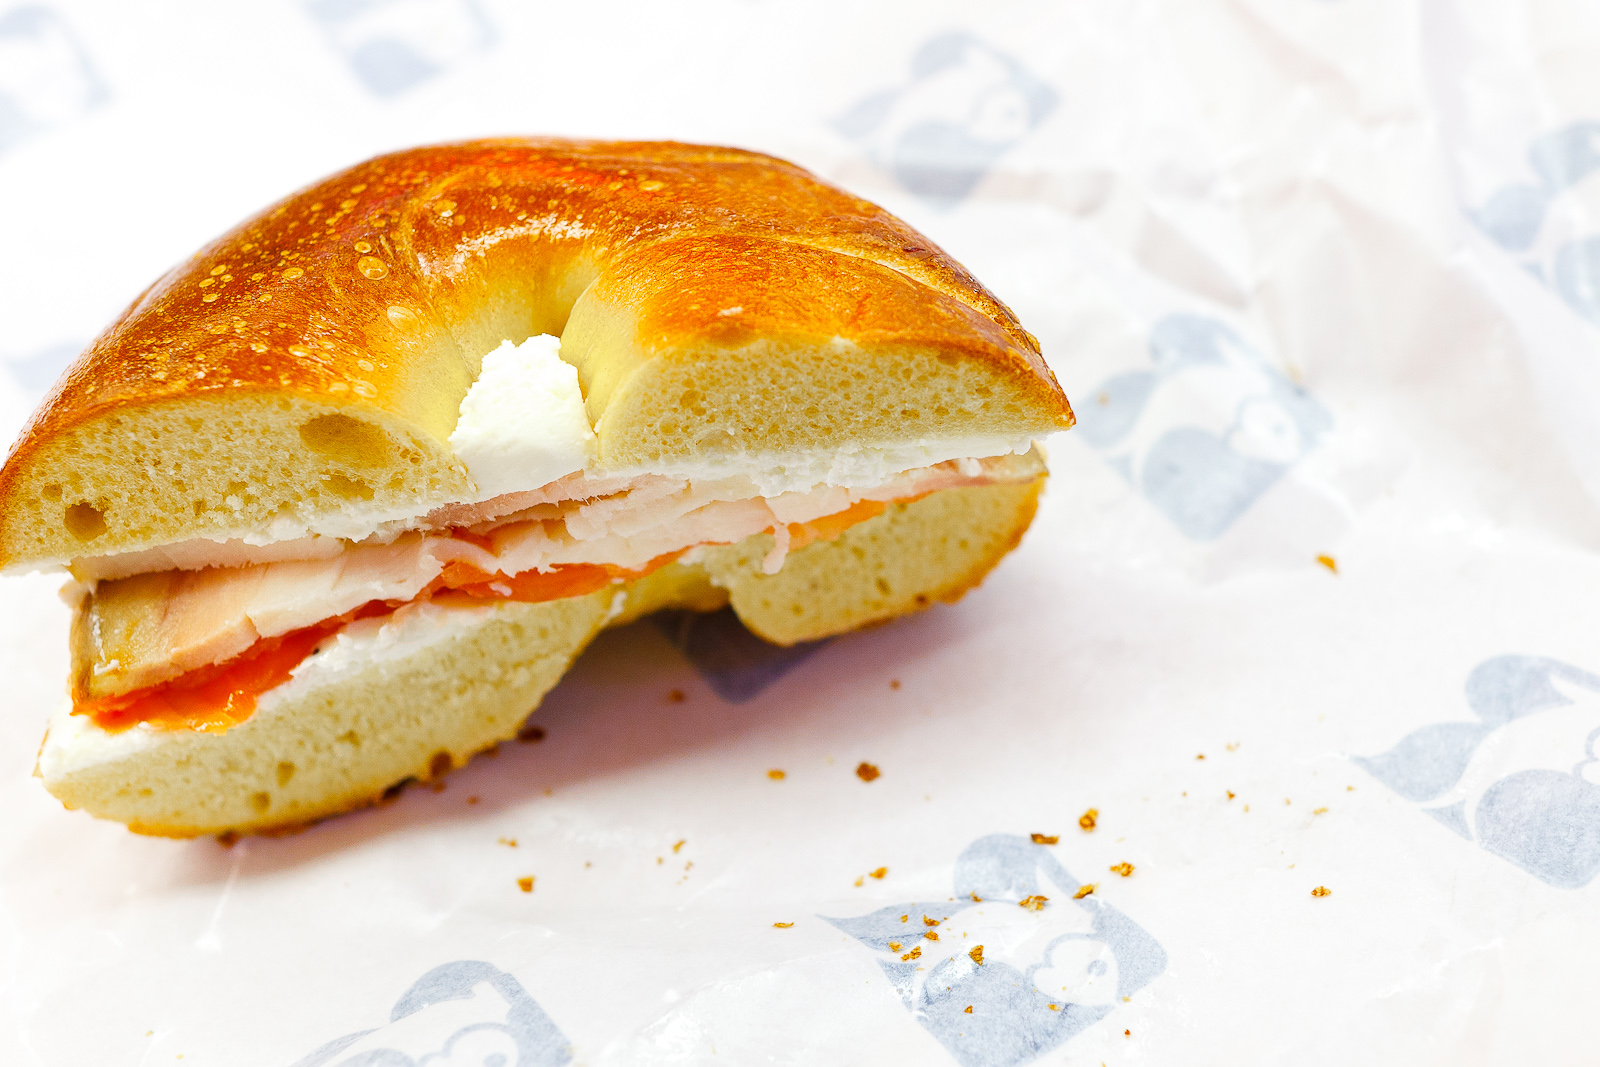 Generational, smoked salmon and sturgeon with cream cheese on an egg bagel ($16.95)